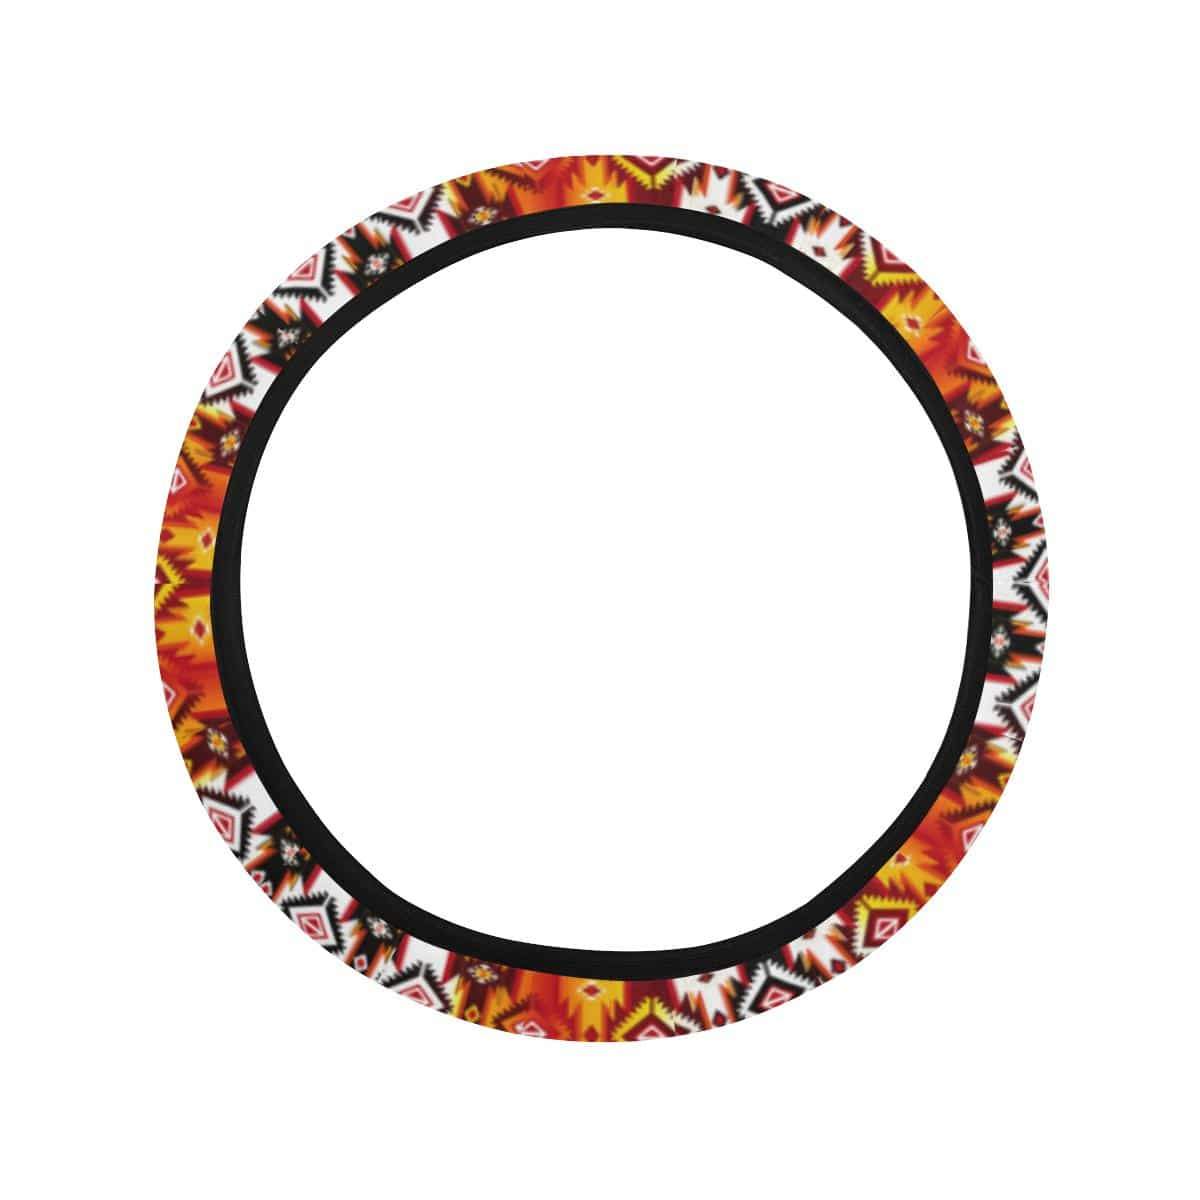 Adobe Fire Steering Wheel Cover with Elastic Edge Steering Wheel Cover with Elastic Edge e-joyer 